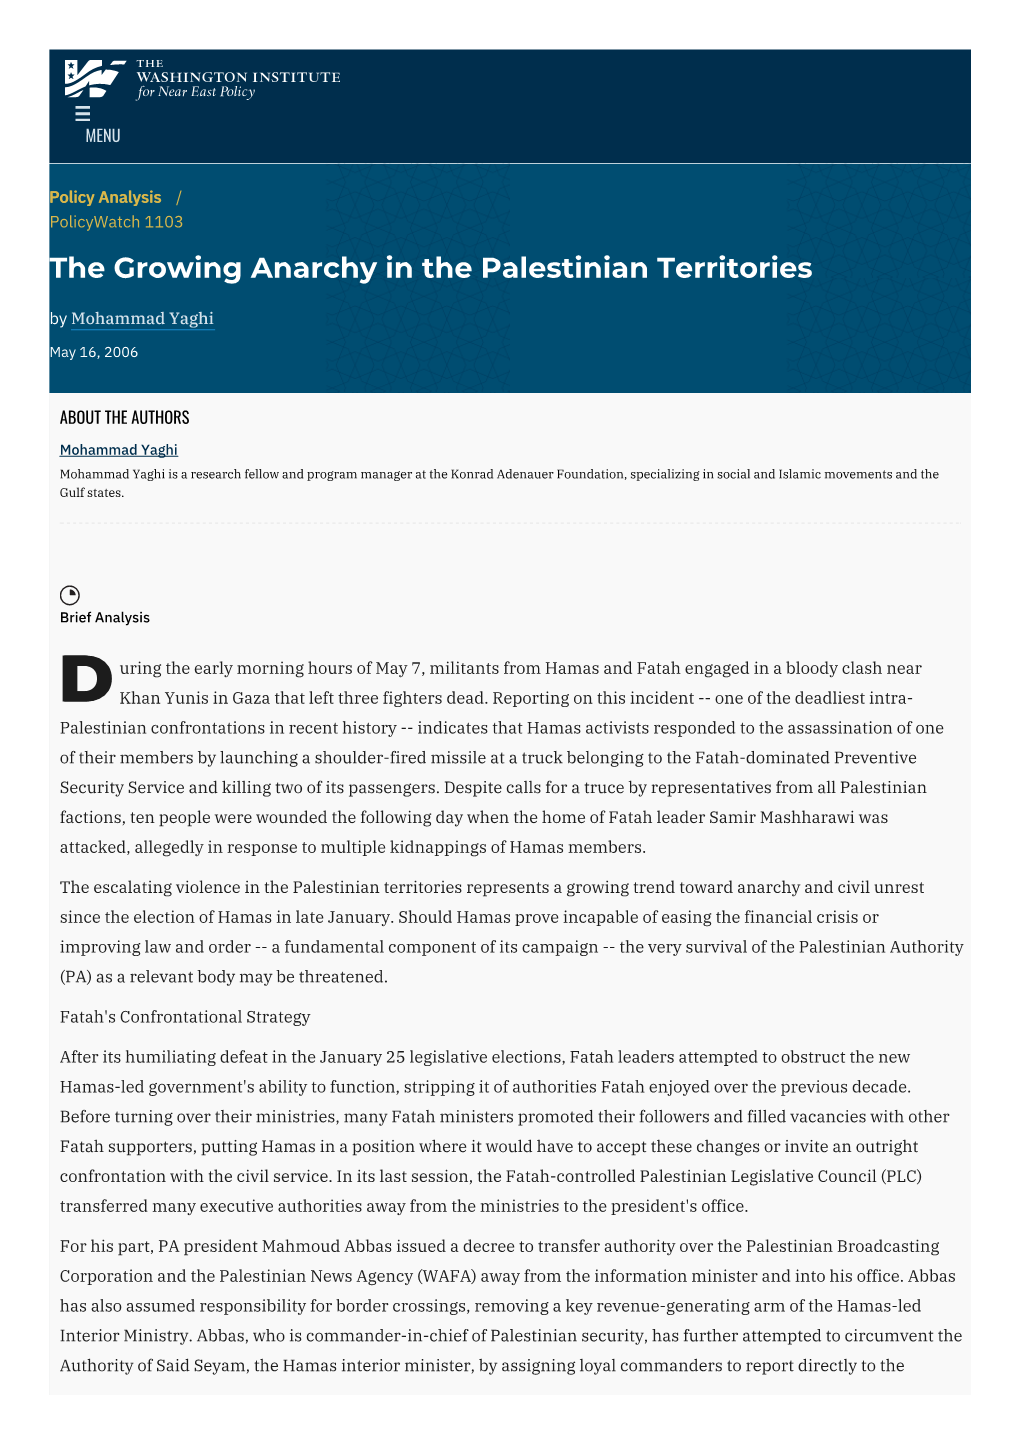 The Growing Anarchy in the Palestinian Territories | The